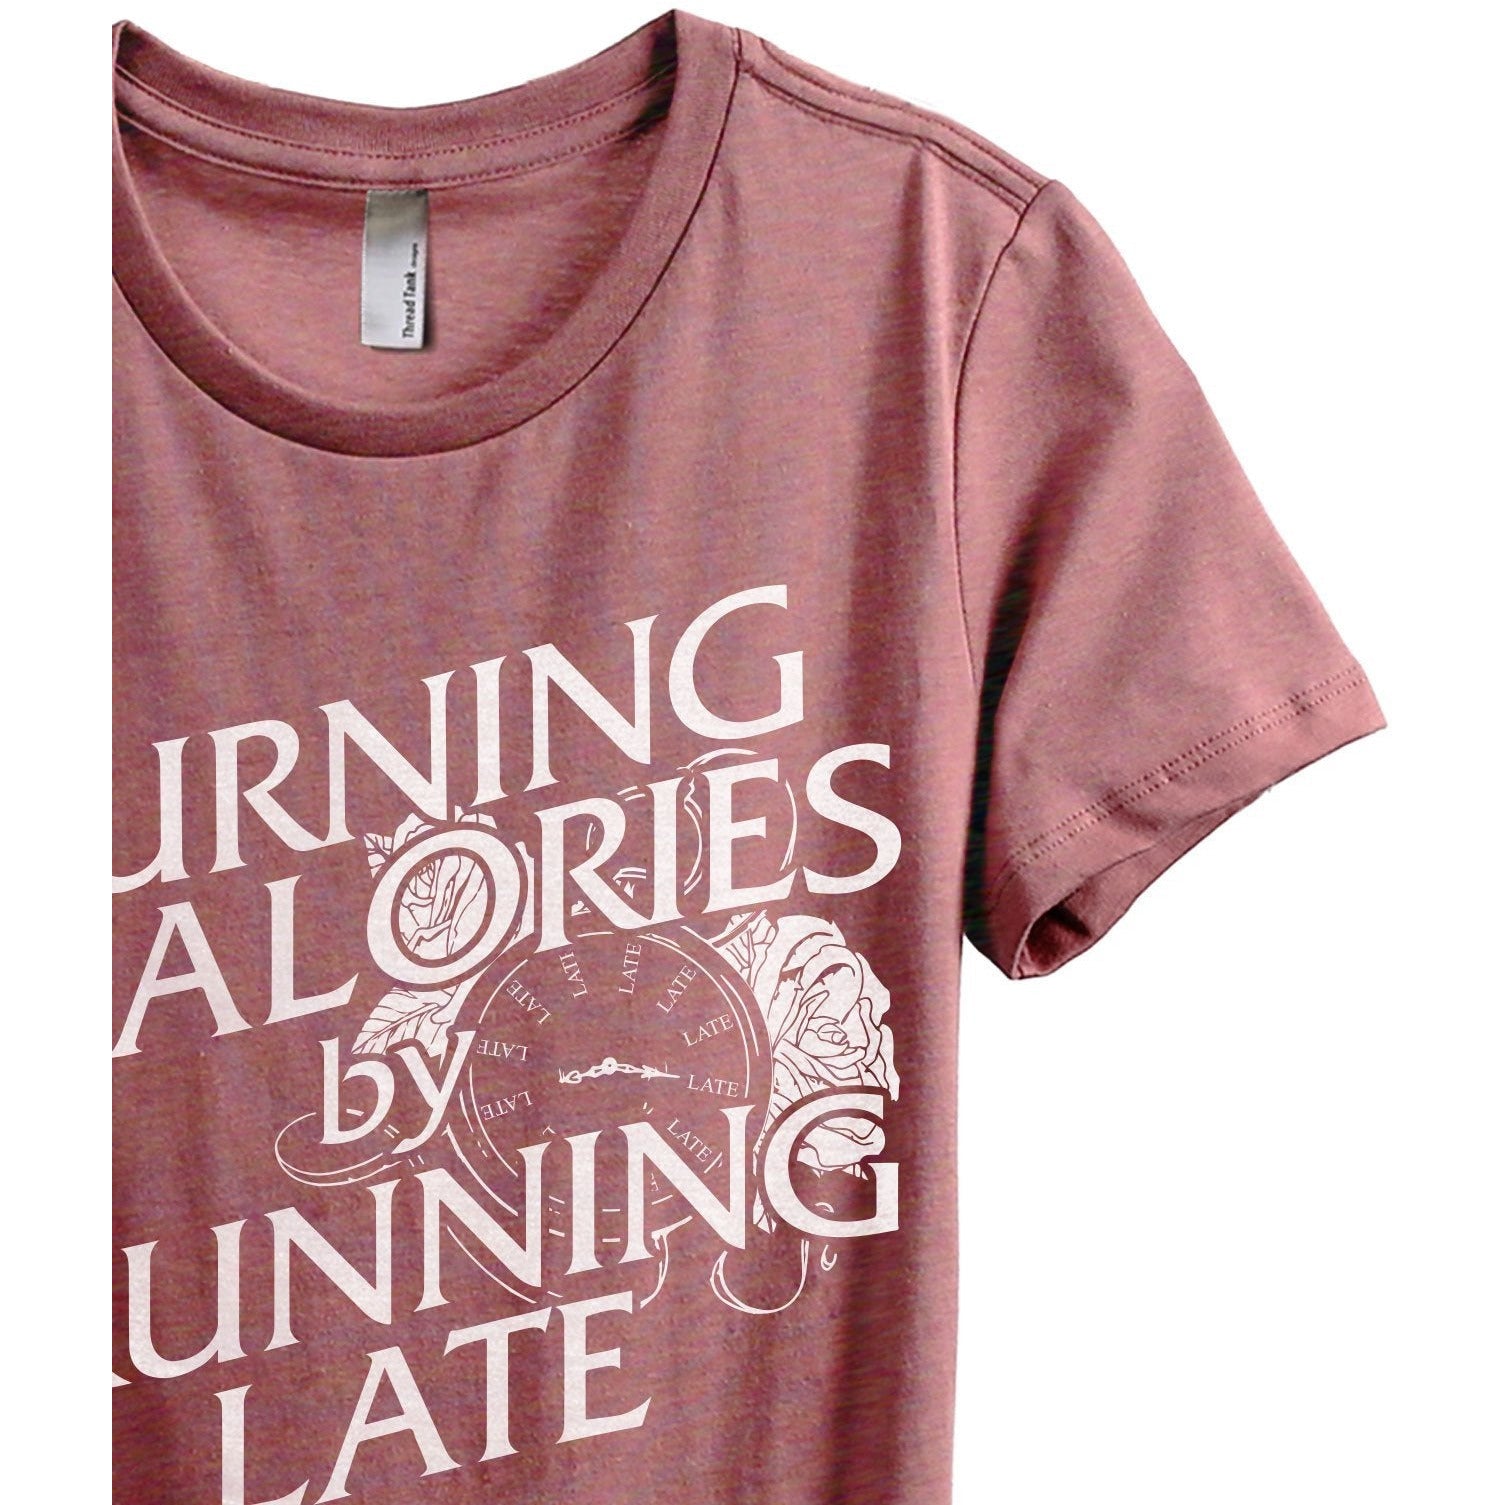 Burning Calories By Running Late Women's Relaxed Crewneck T-Shirt Top Tee Heather Rouge Zoom Details
